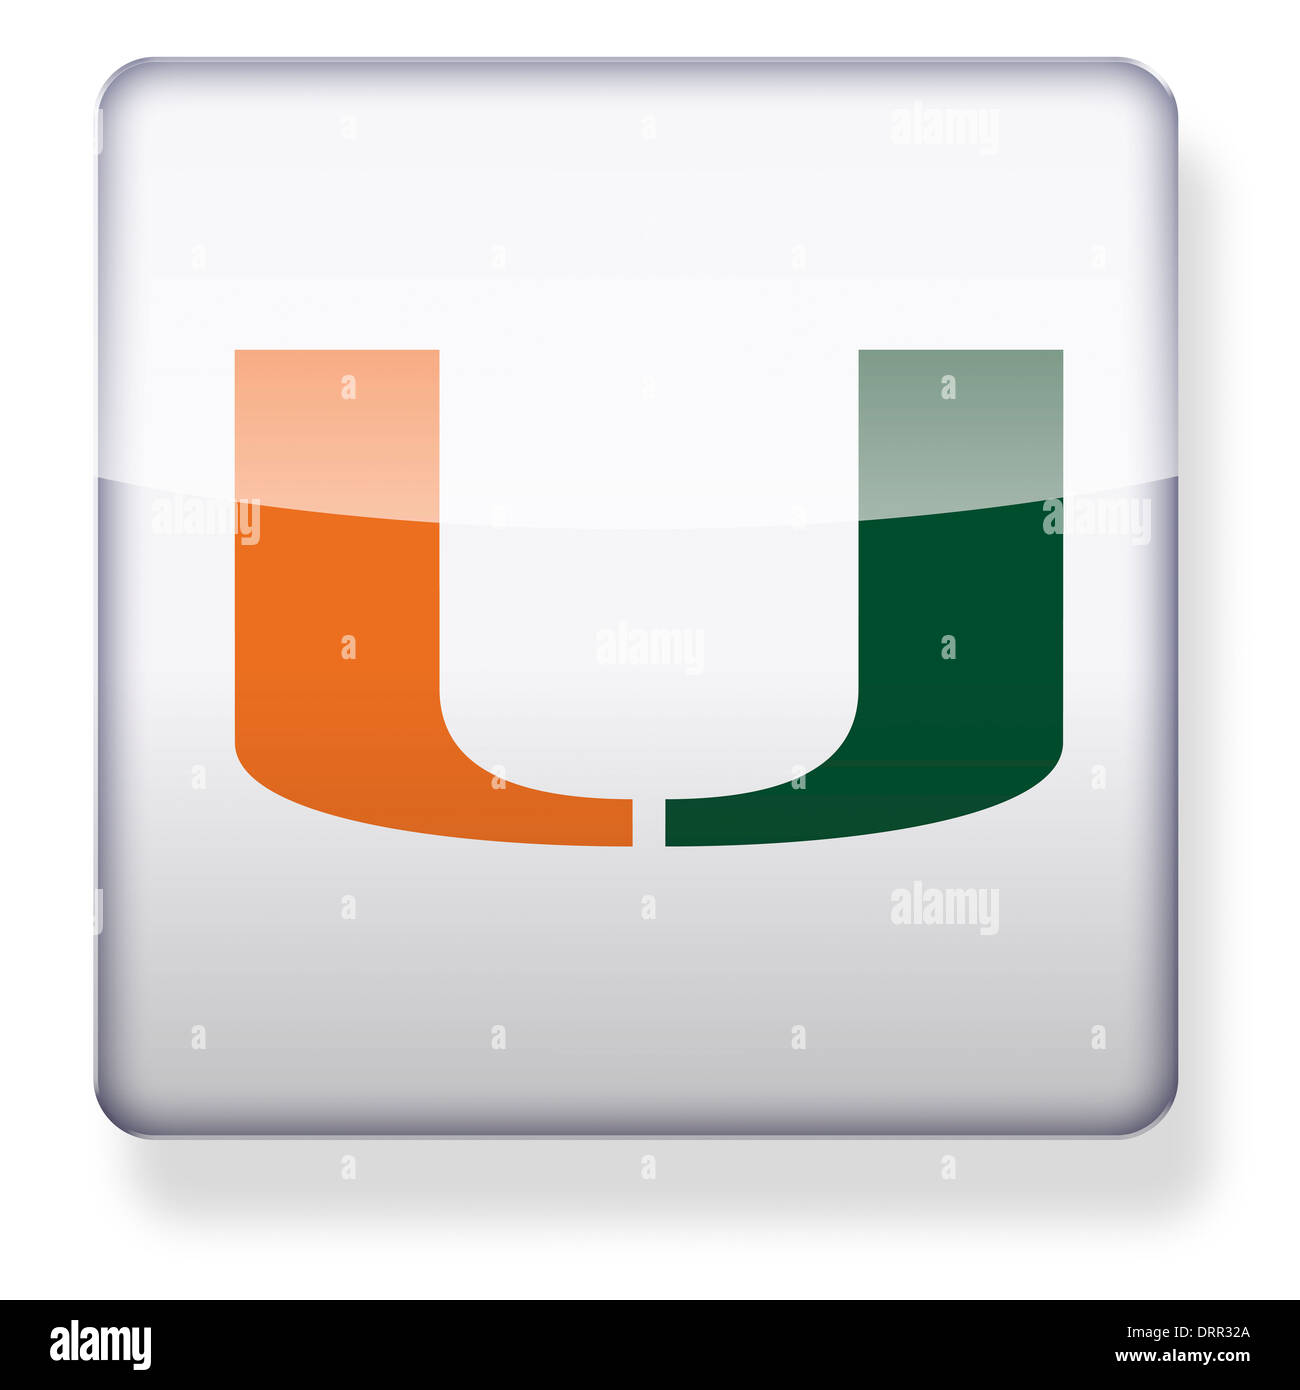 Miami Hurricanes US college football logo as an app icon. Clipping path included. Stock Photo